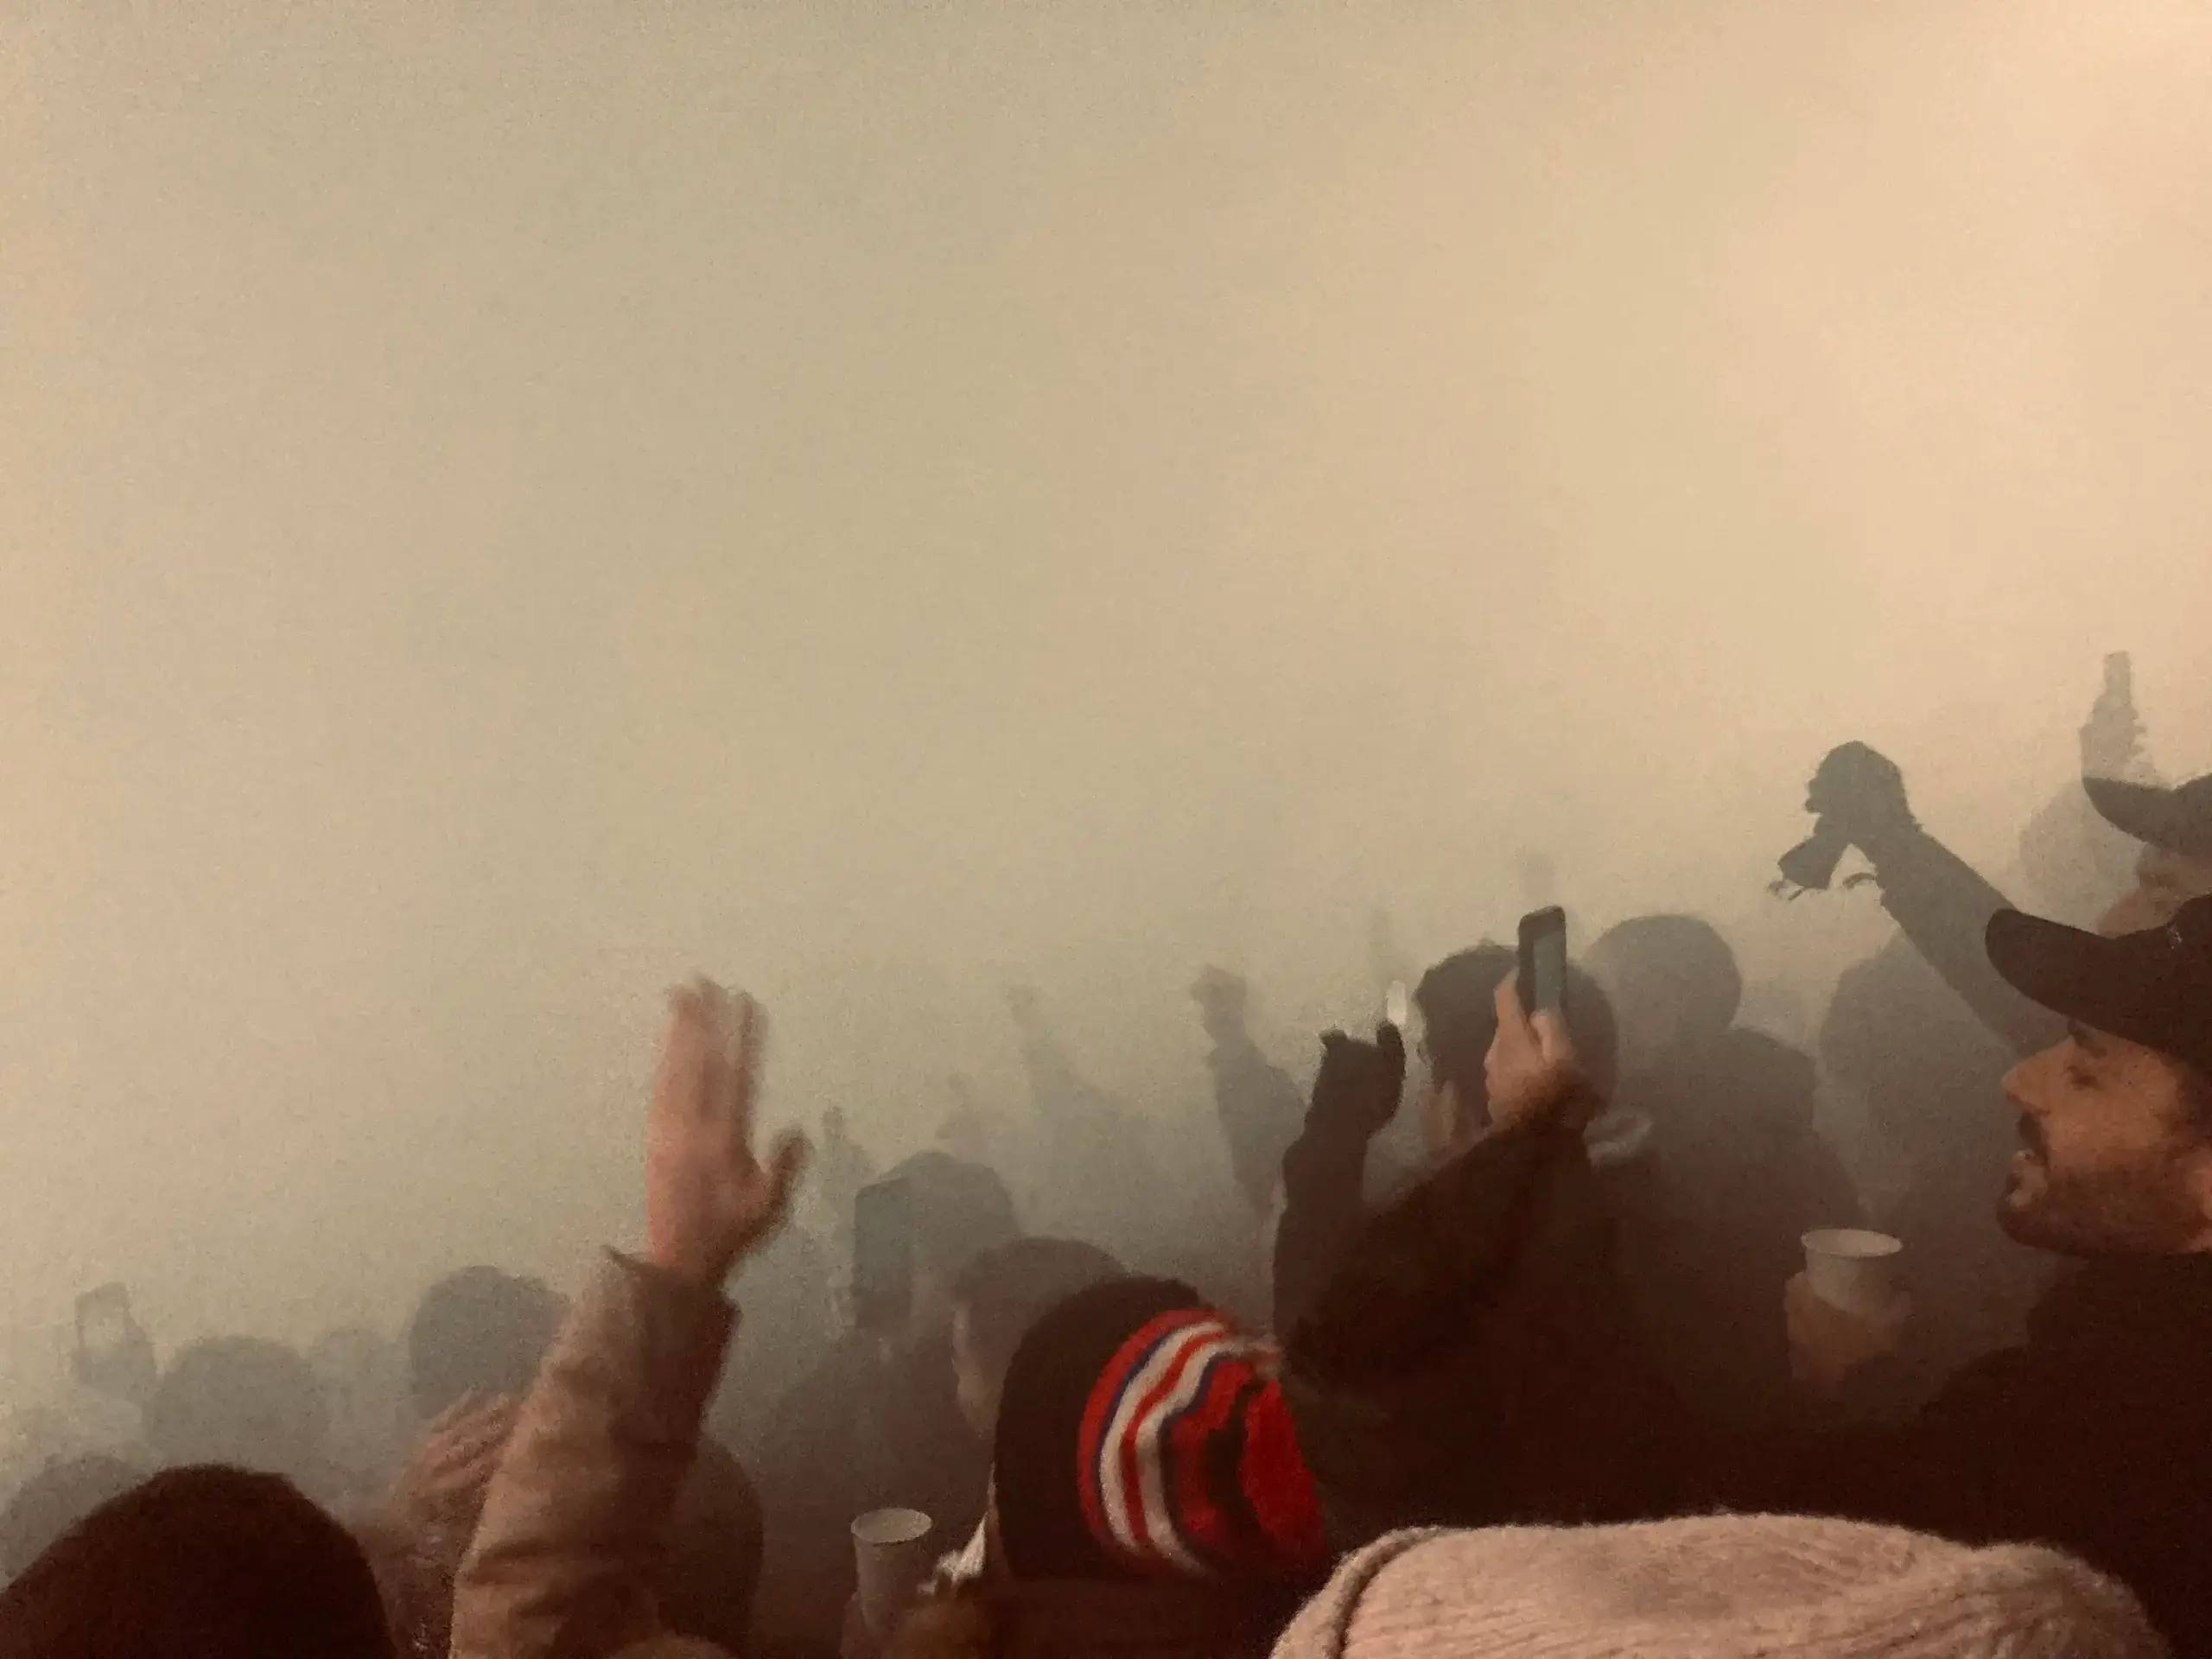 Smoke filled the stand as the fans celebrated